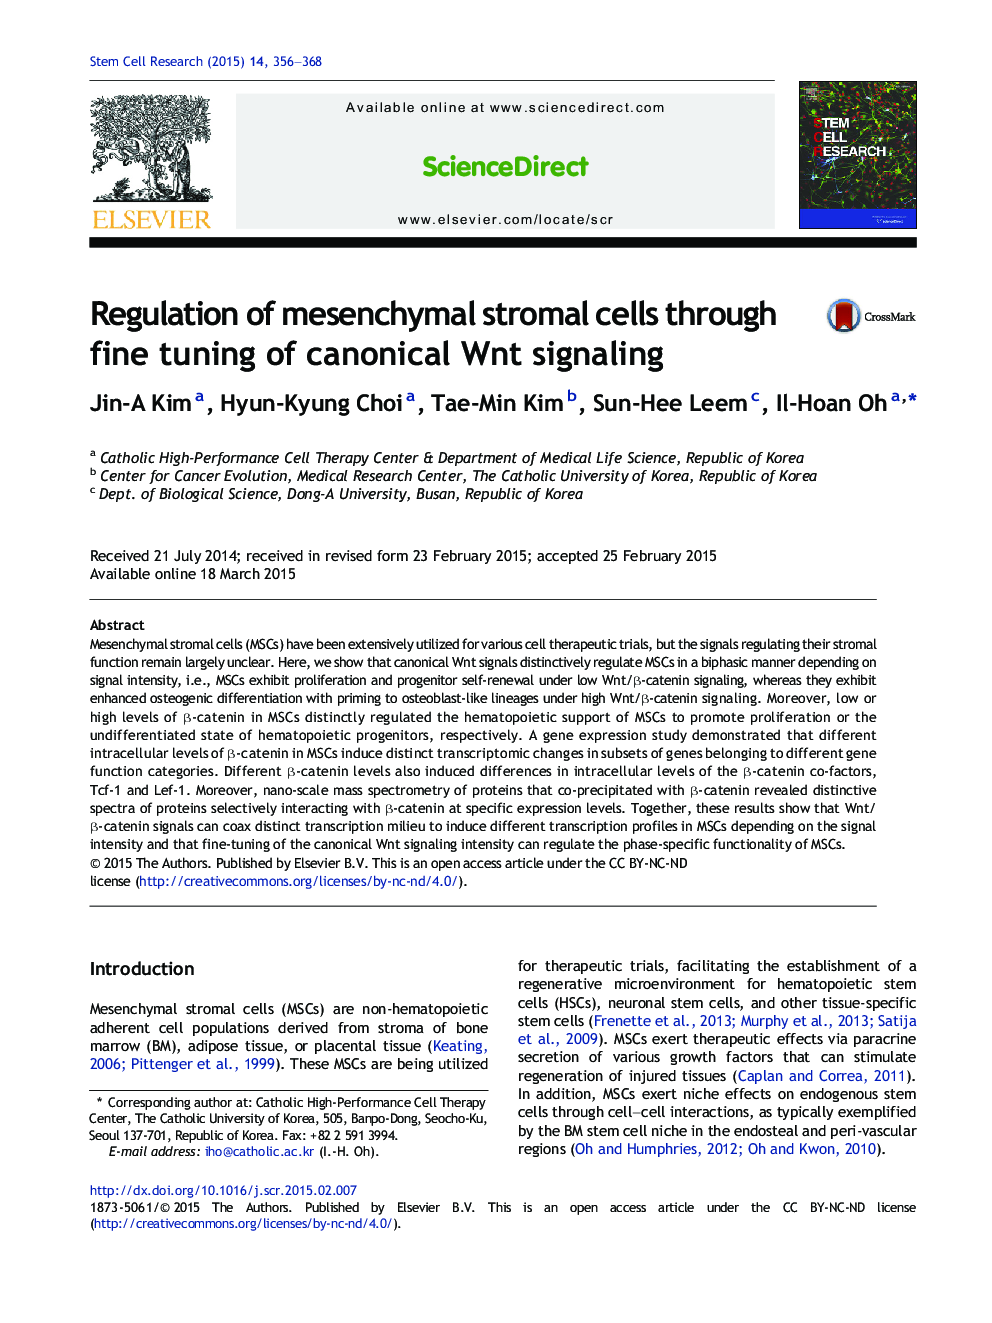 Regulation of mesenchymal stromal cells through fine tuning of canonical Wnt signaling